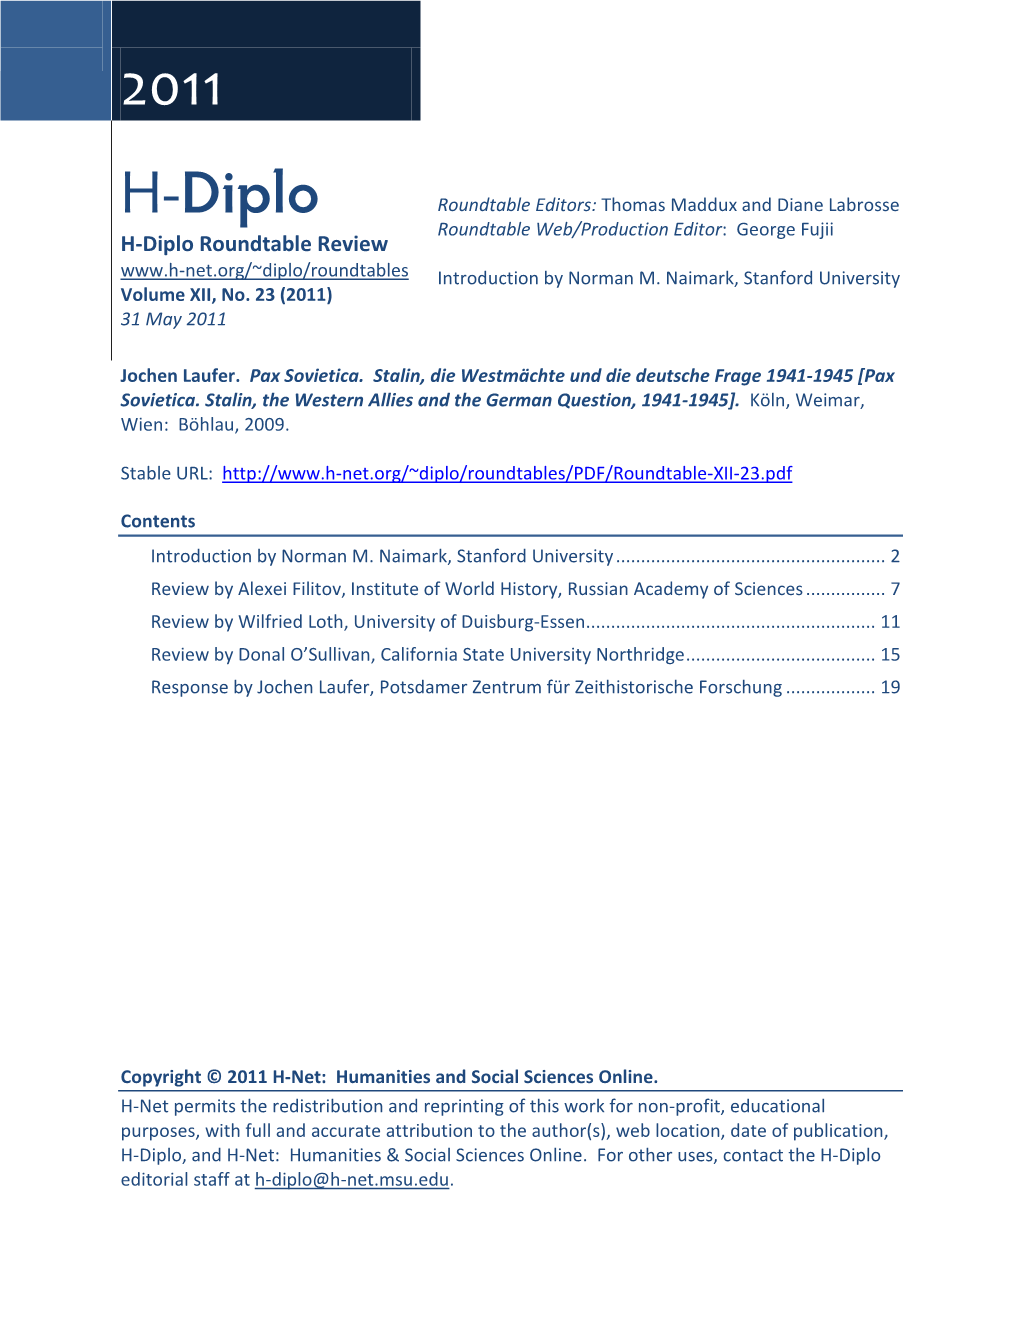 H-Diplo Roundtables, Vol. XII, No. 23 (2011)